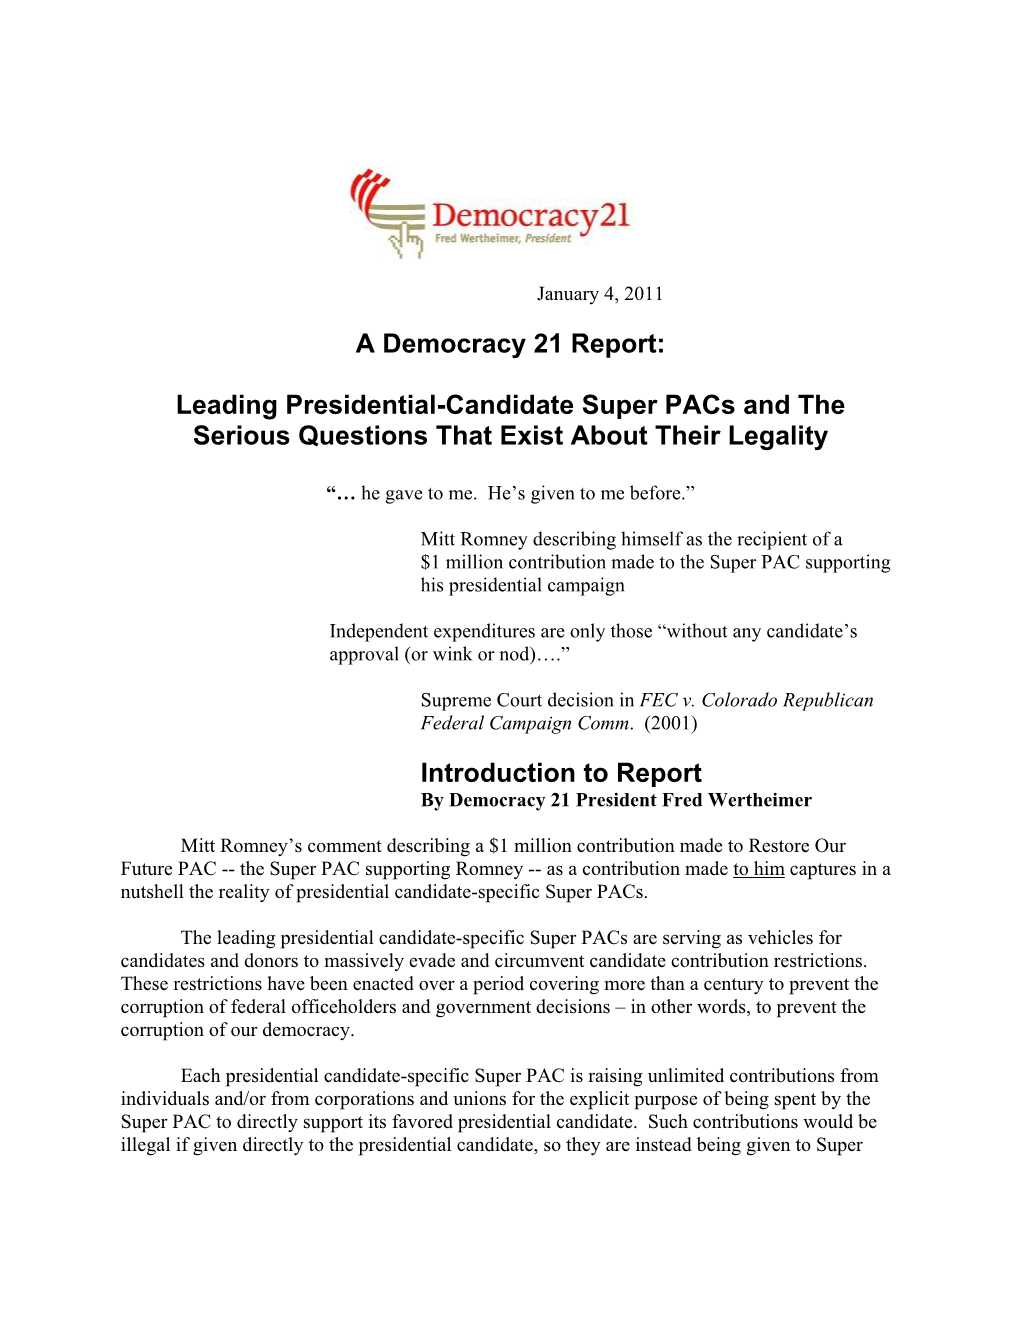 A Democracy 21 Report: Leading Presidential-Candidate Super